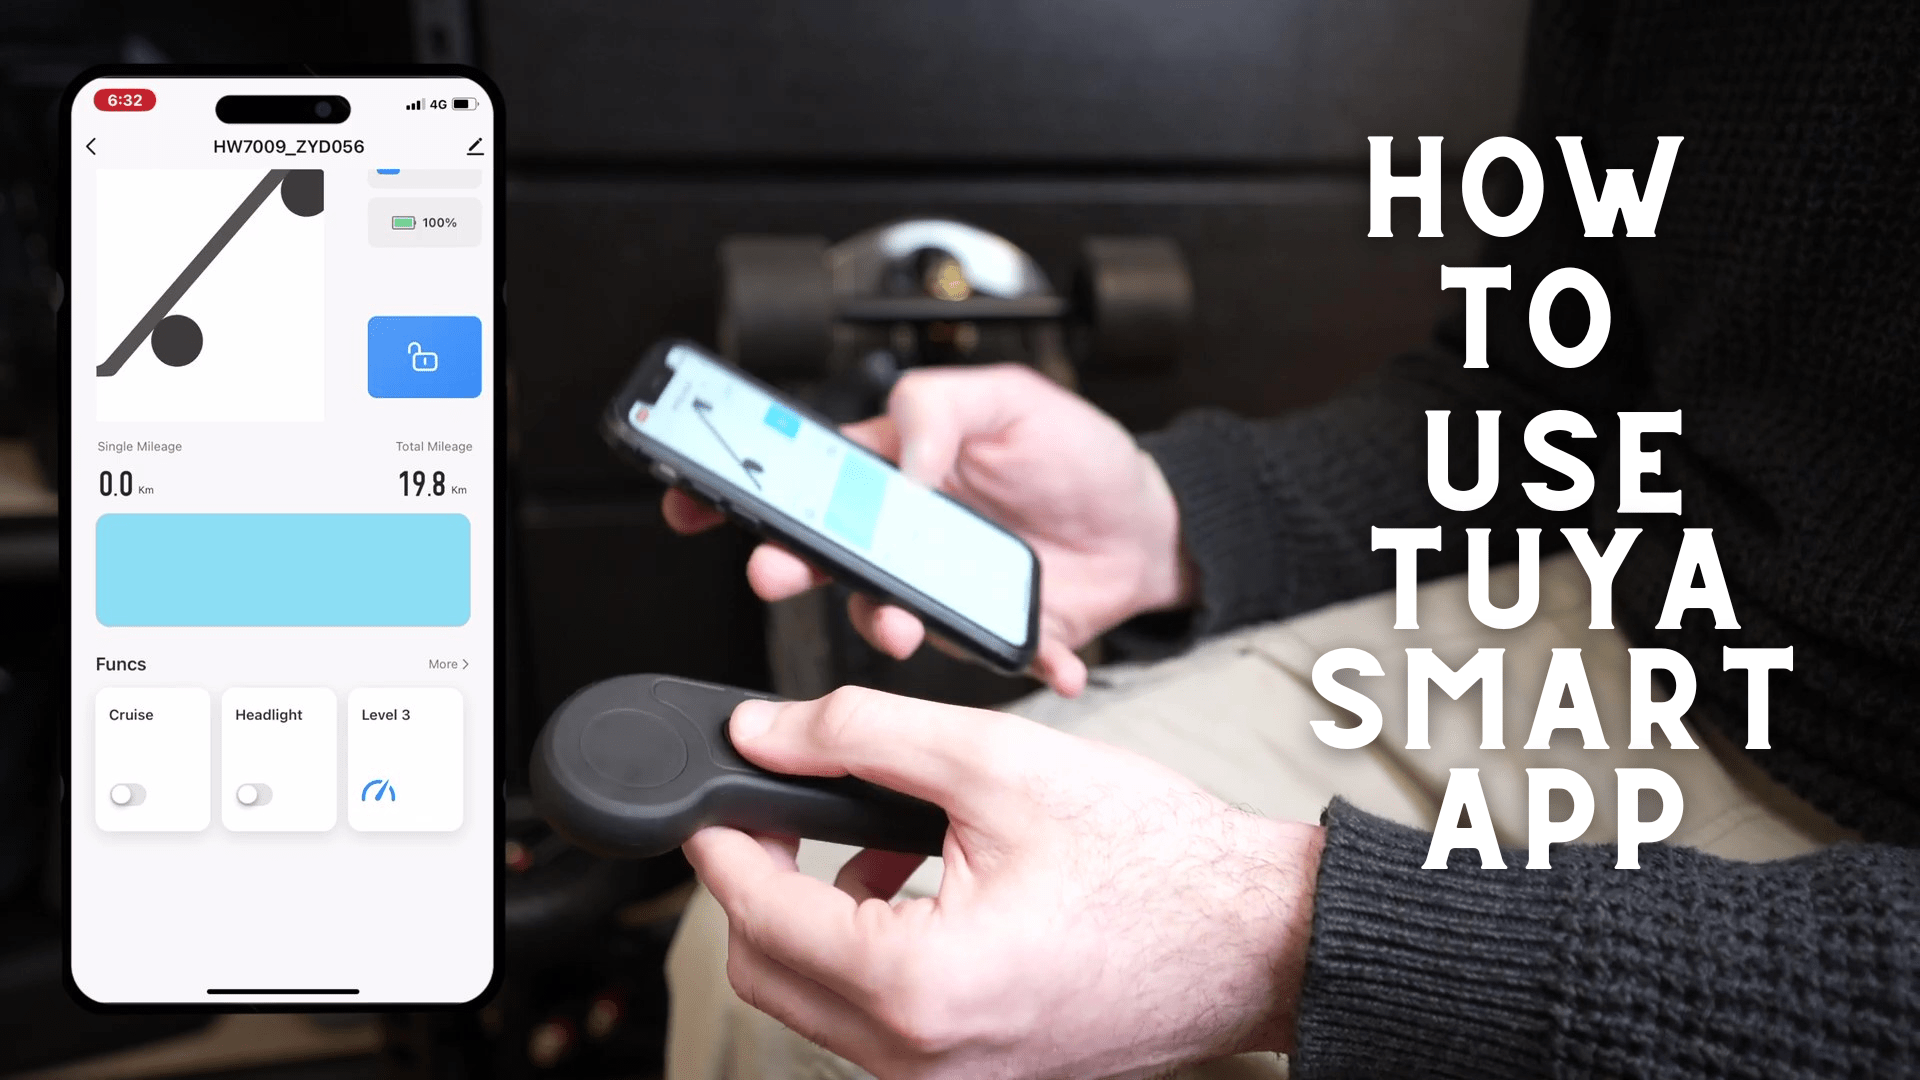 How to use the Tuya Smart App for WowGo's new boards? - WOWGO BOARD